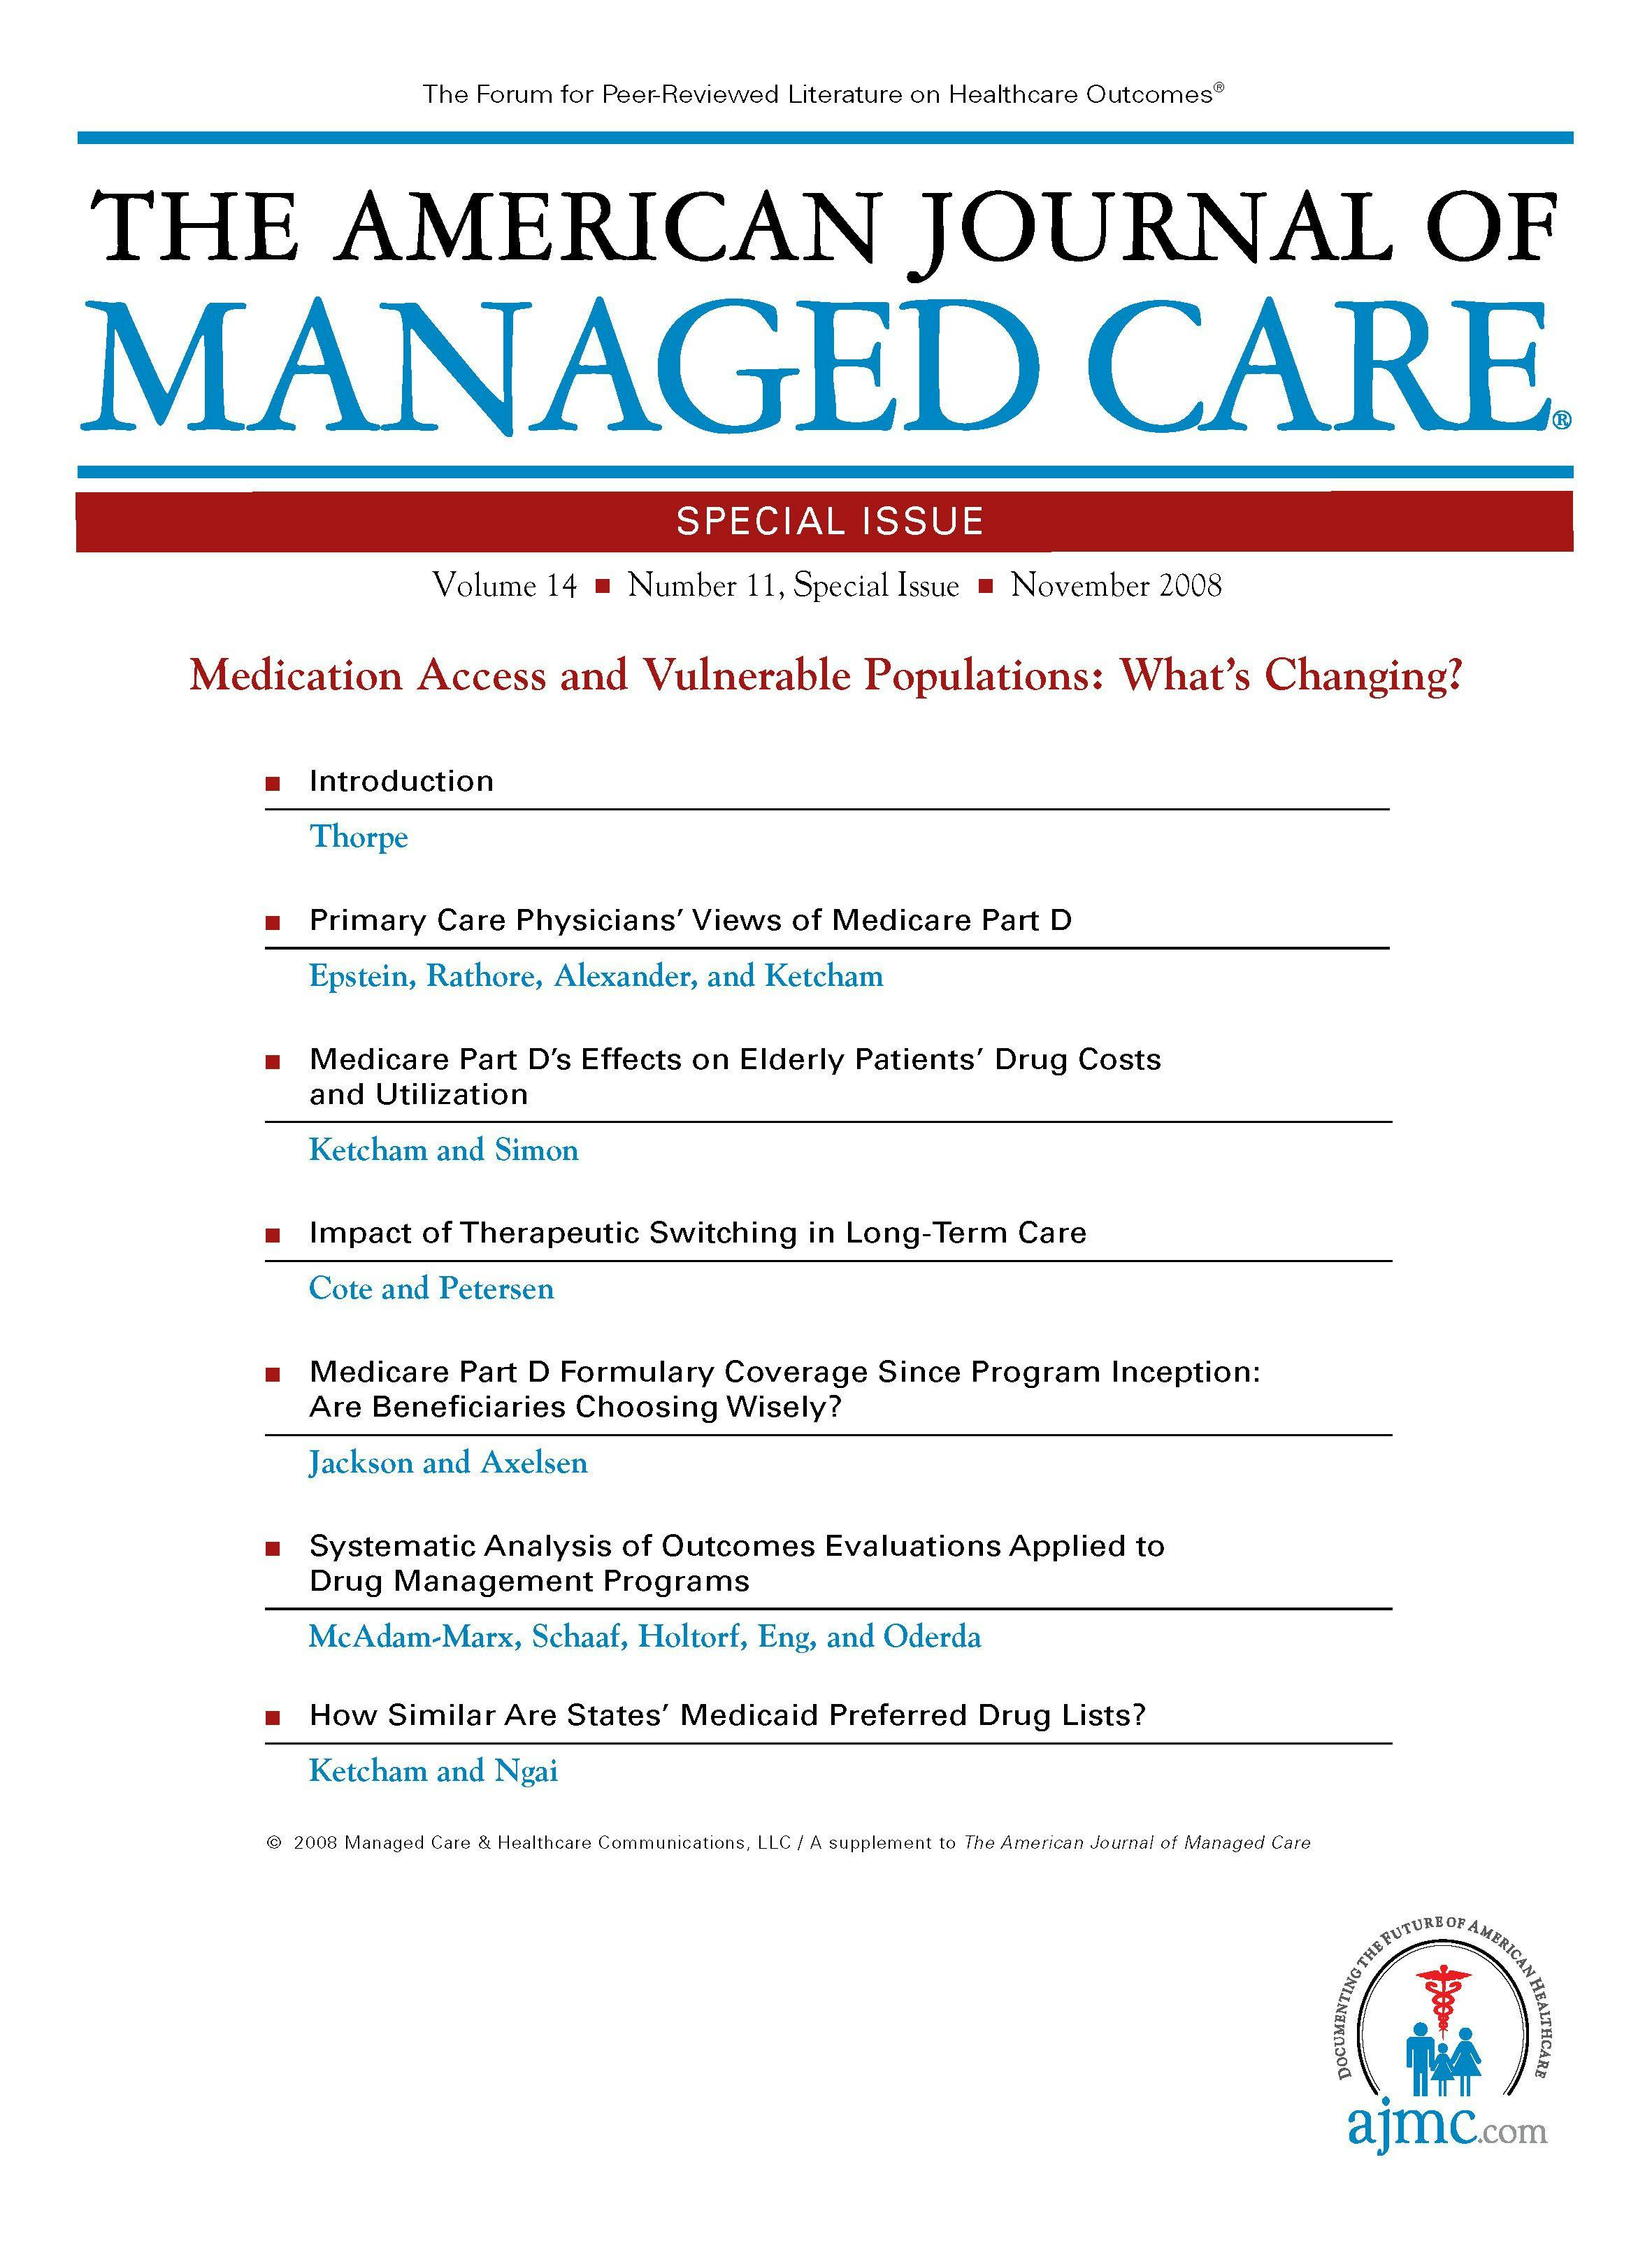 November 2008 - Special Issue